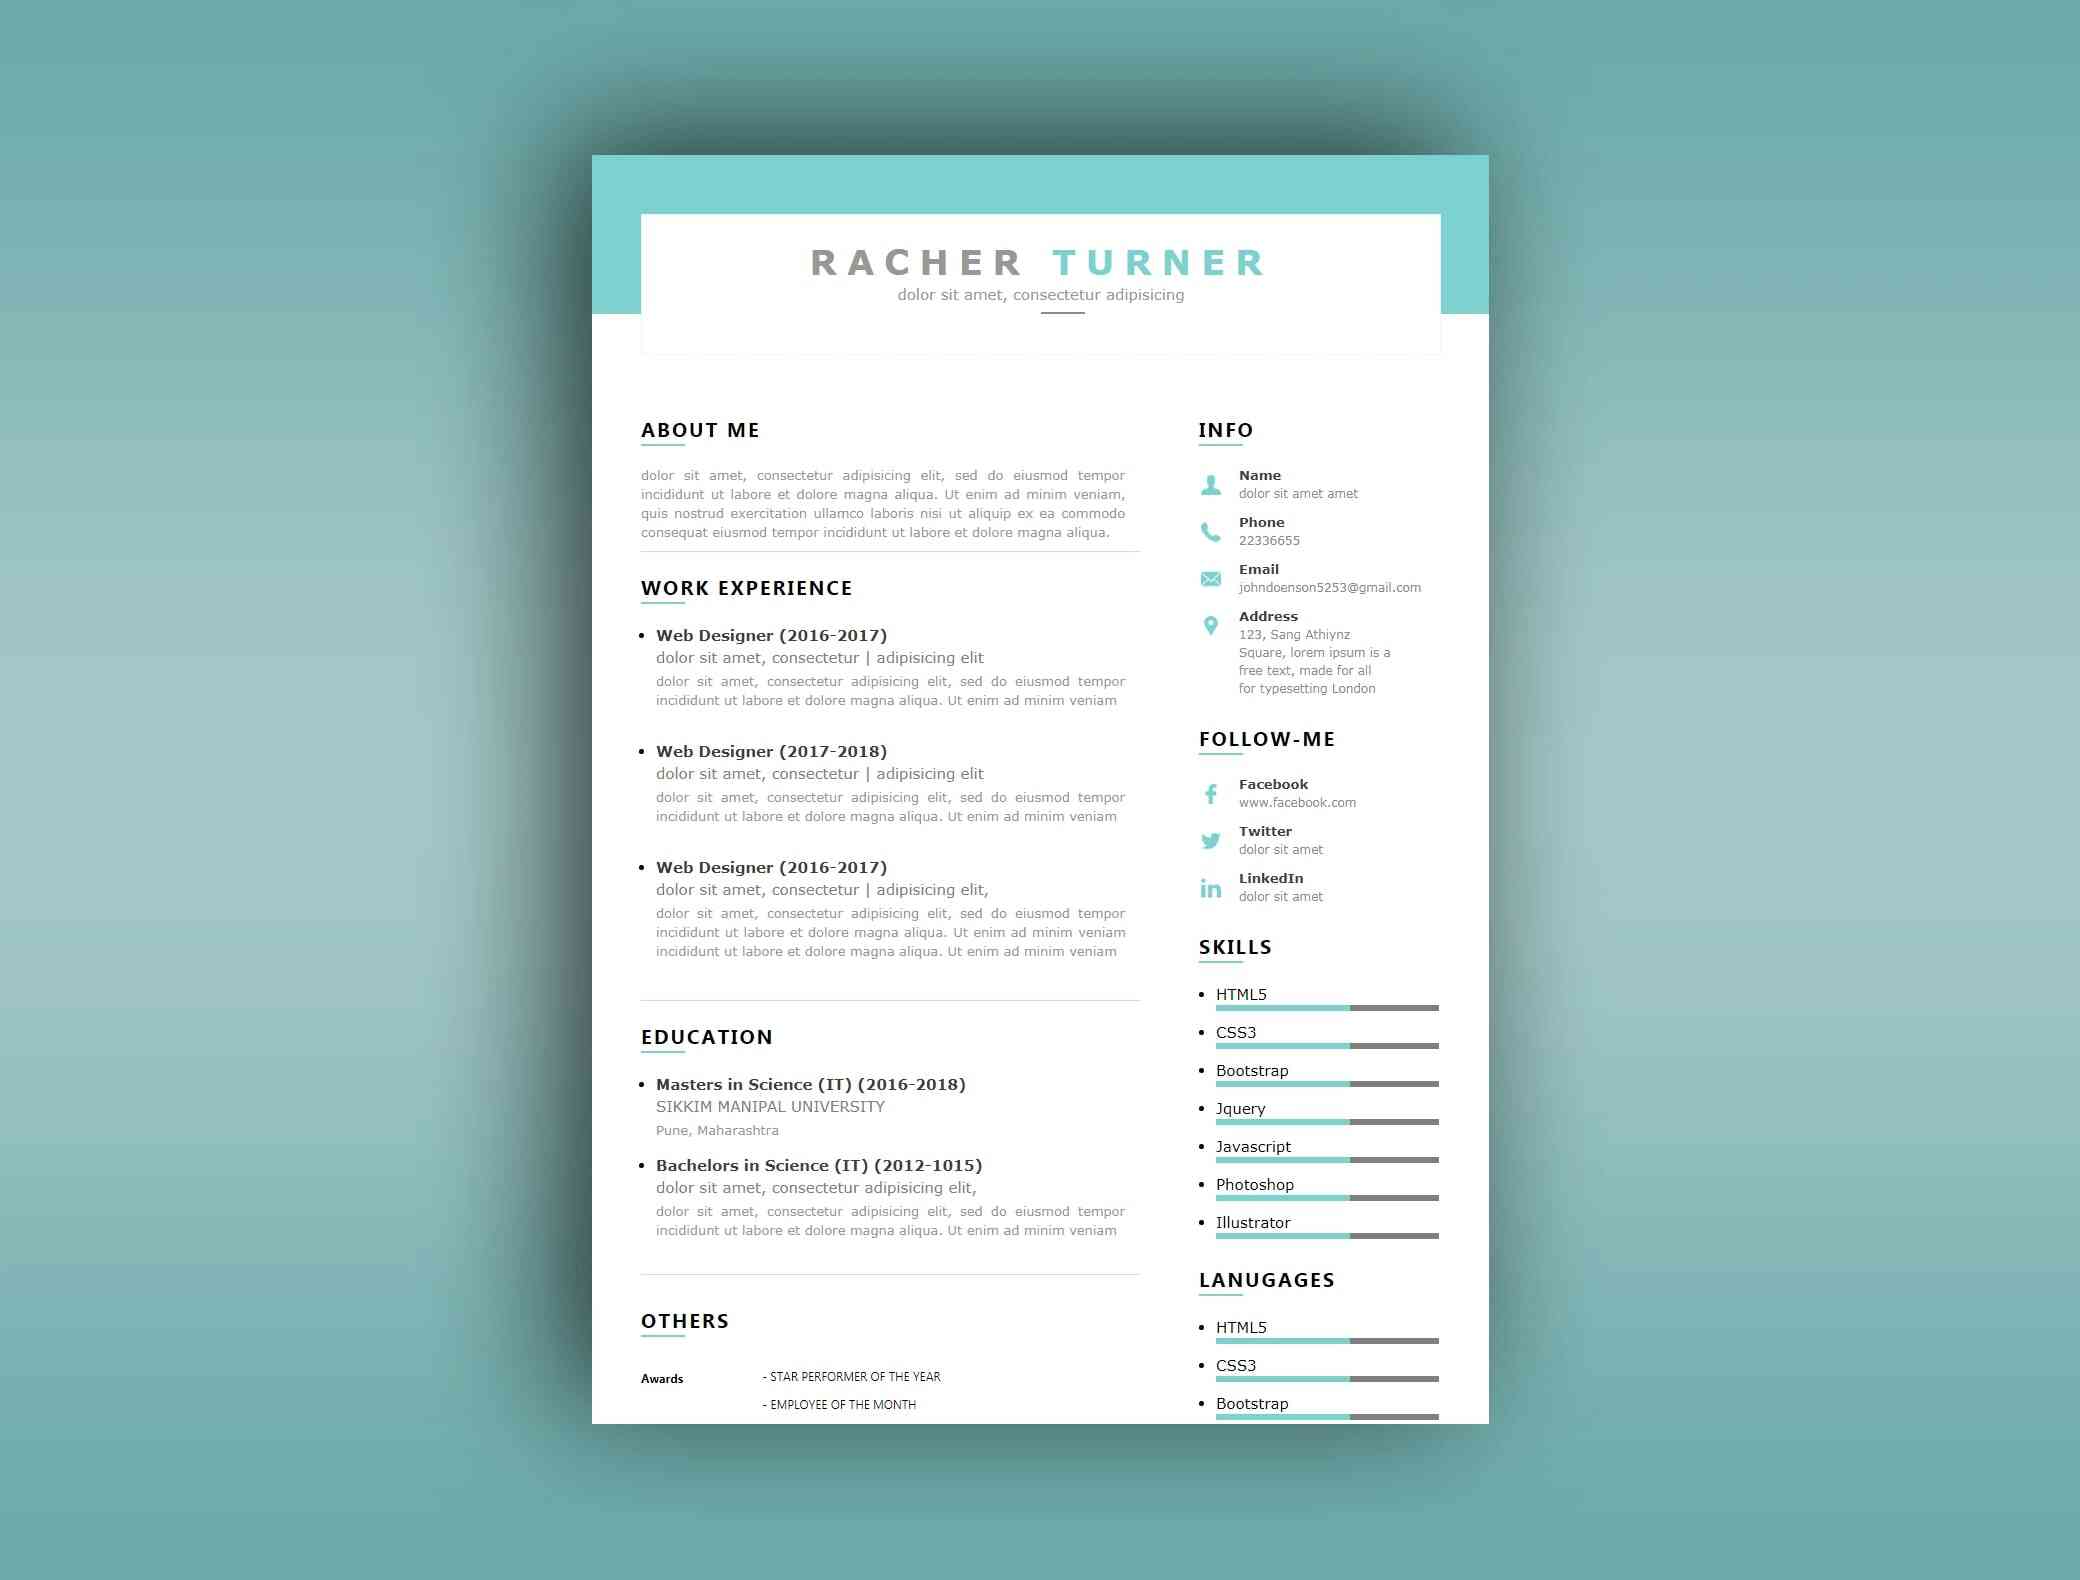 Build a resume that works